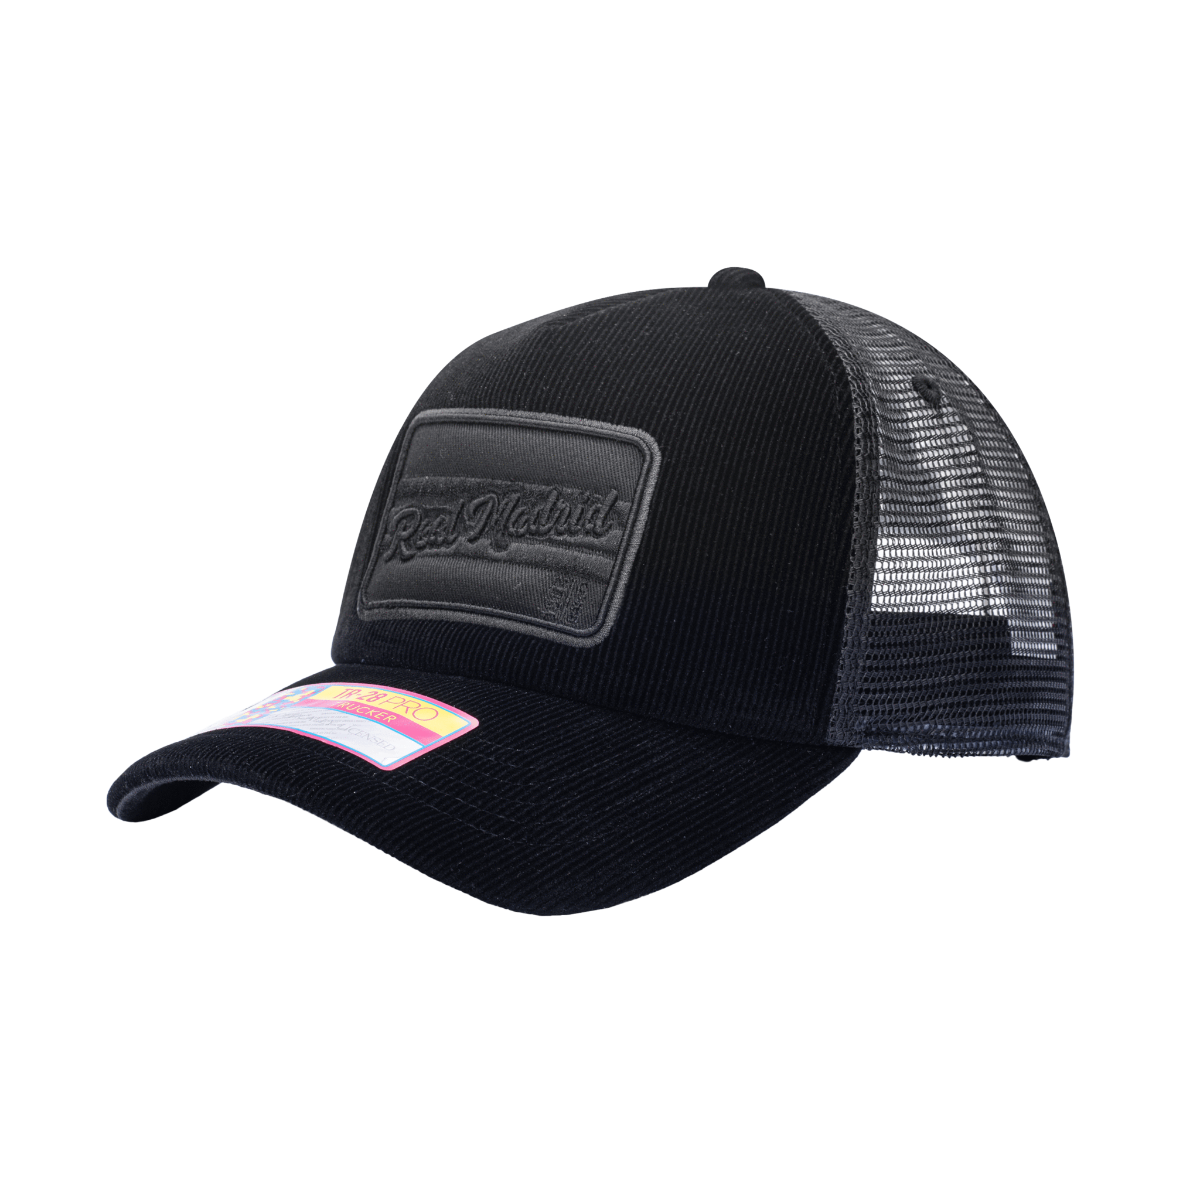 FI Collection Real Madrid Signature Trucker Hat - Black (Diagonal 1)